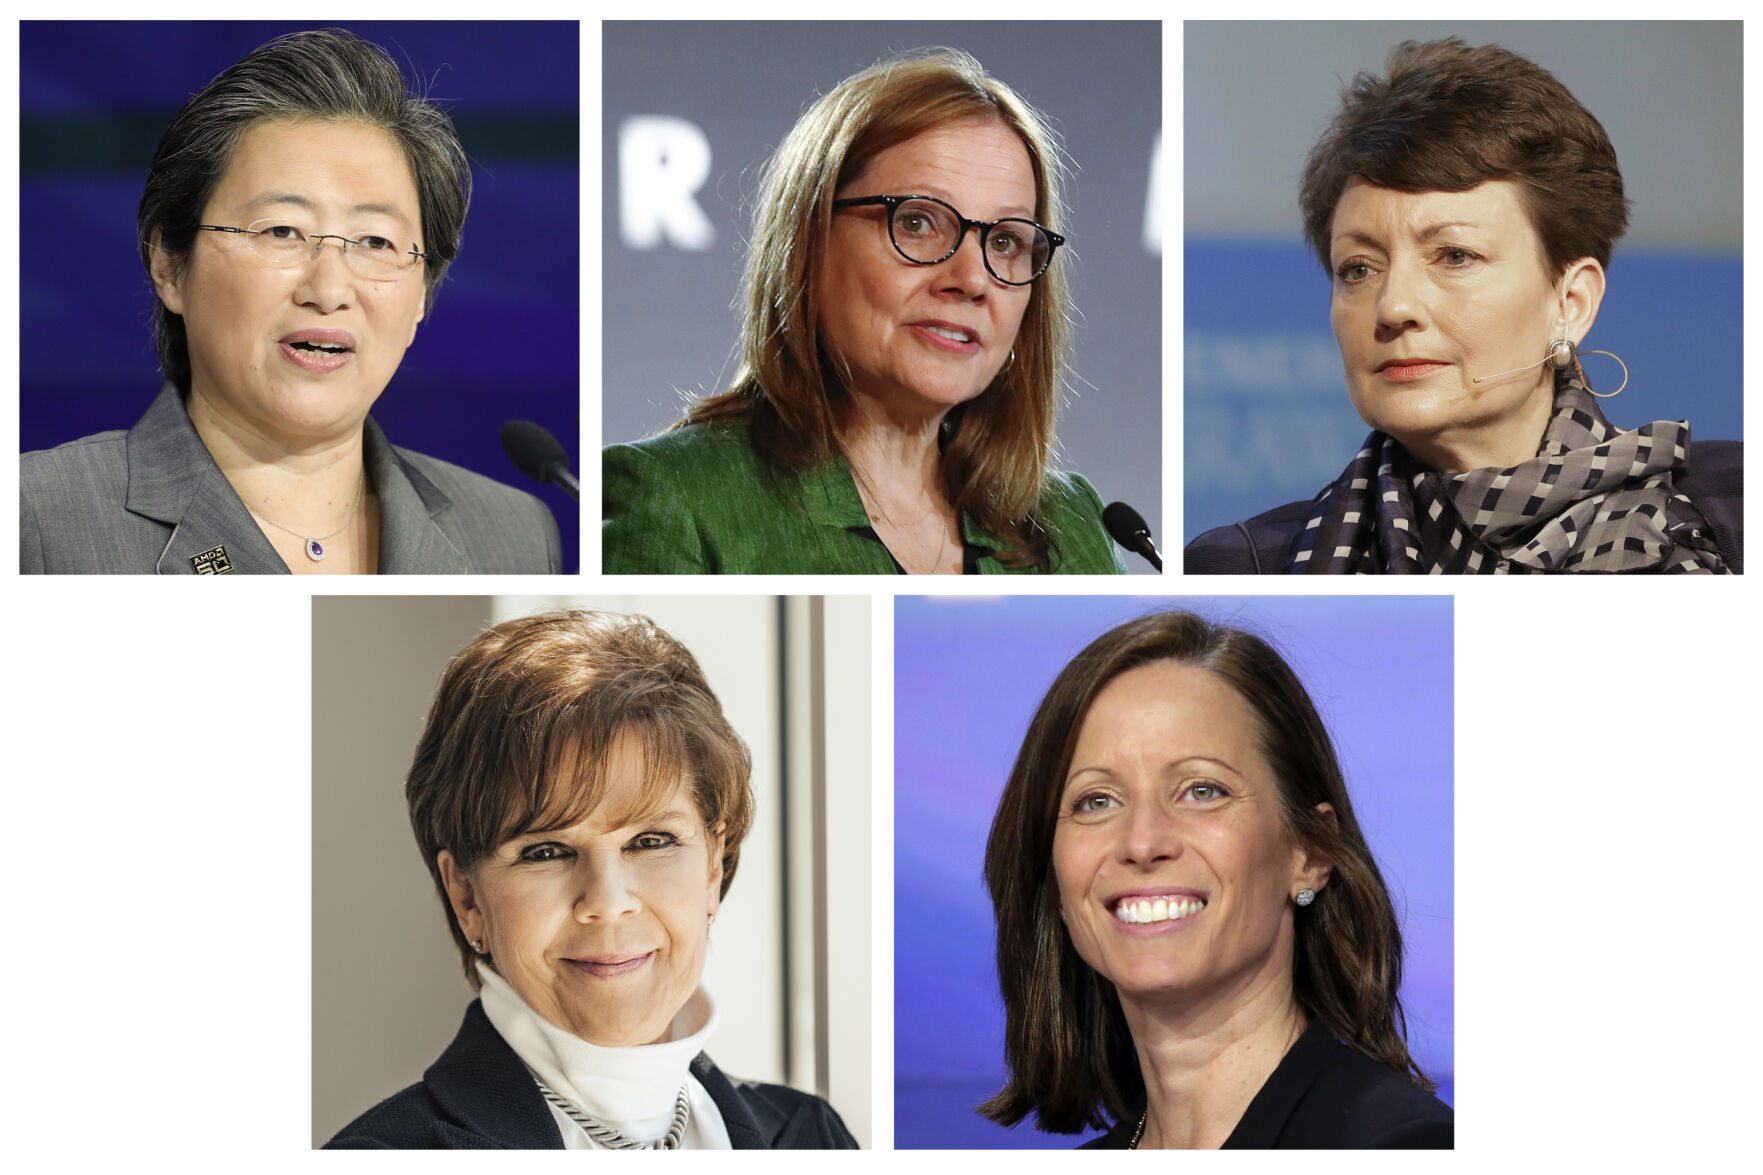 <p>This combination of photos show the five top paid women CEOs in 2022. From top left, Lisa Su of Advanced Micro Devices, Mary Barra of General Motors, Lynn Good of Duke Energy. FROM bottom left, Phebe Novakovic of General Dynamics and Adena Friedman of Nasdaq, Inc. 2022 was a mixed bag pay-wise for the women who run companies in the S&P 500 - compensation increased for more than half of them, but the median pay package fell 6%. Of the 343 CEOs in the compensation survey of S&P 500 companies done by the AP and Equilar, only 20 were women. (AP Photo)</p>   PHOTO CREDIT: AP Photo